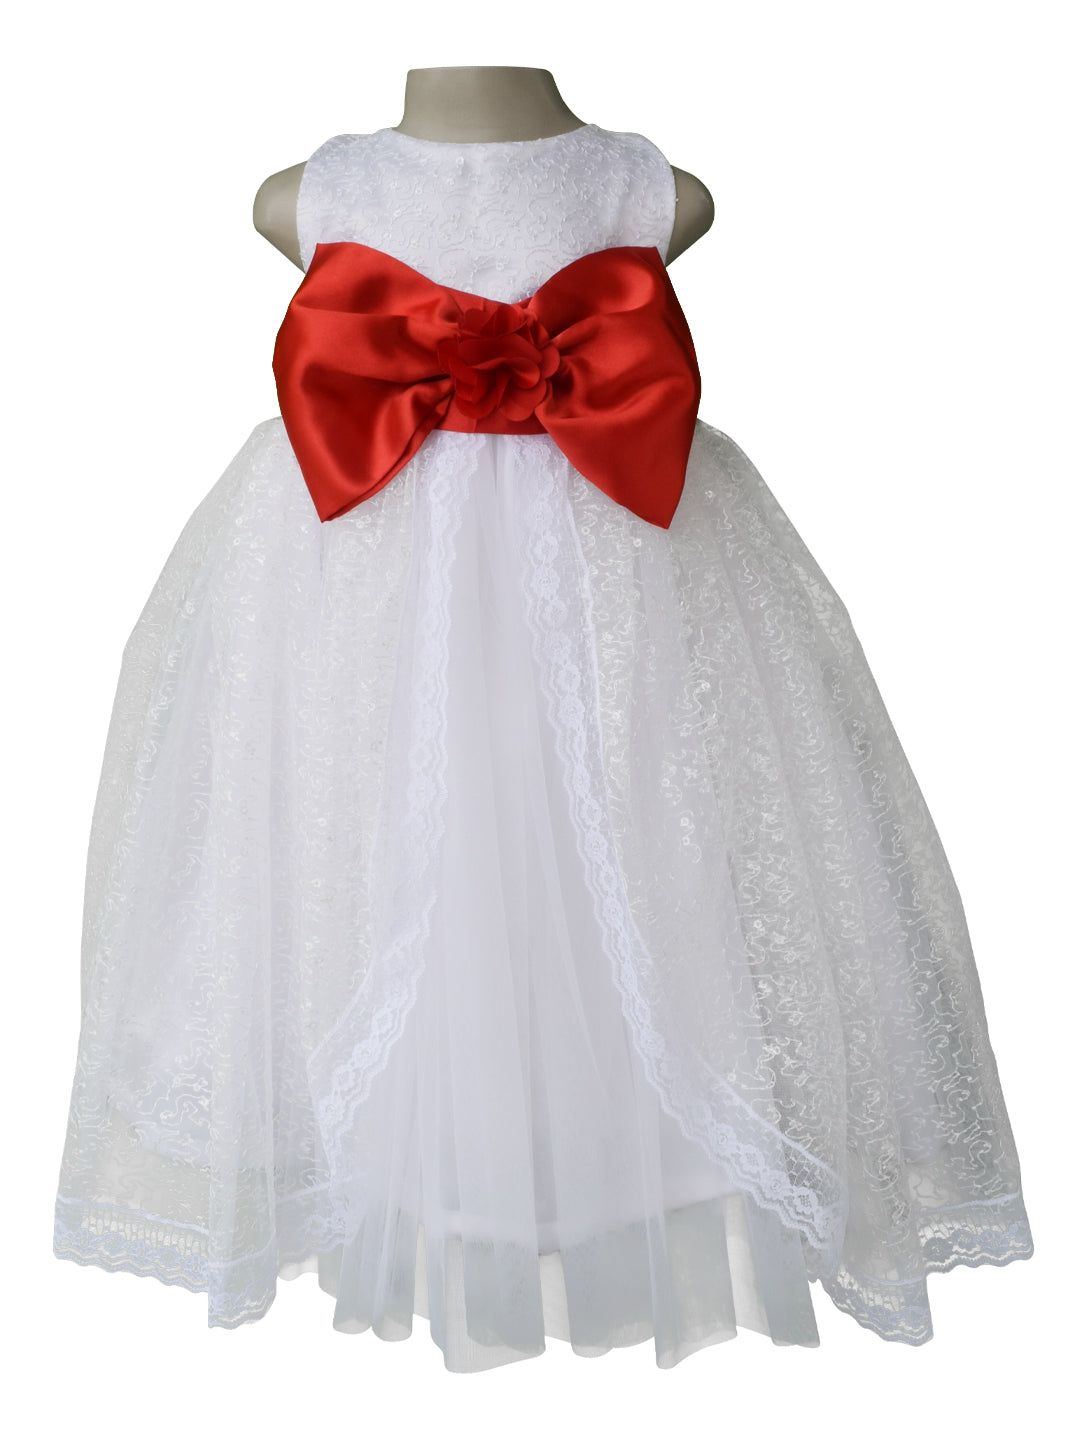 Buy Classic Vintage Off-white Ivory Cotton Lace Dress Red Ribbon Sequin  Flower Girl Valentine's Day Wedding Formal Summer Birthday Junior Baby  Online in India - Etsy